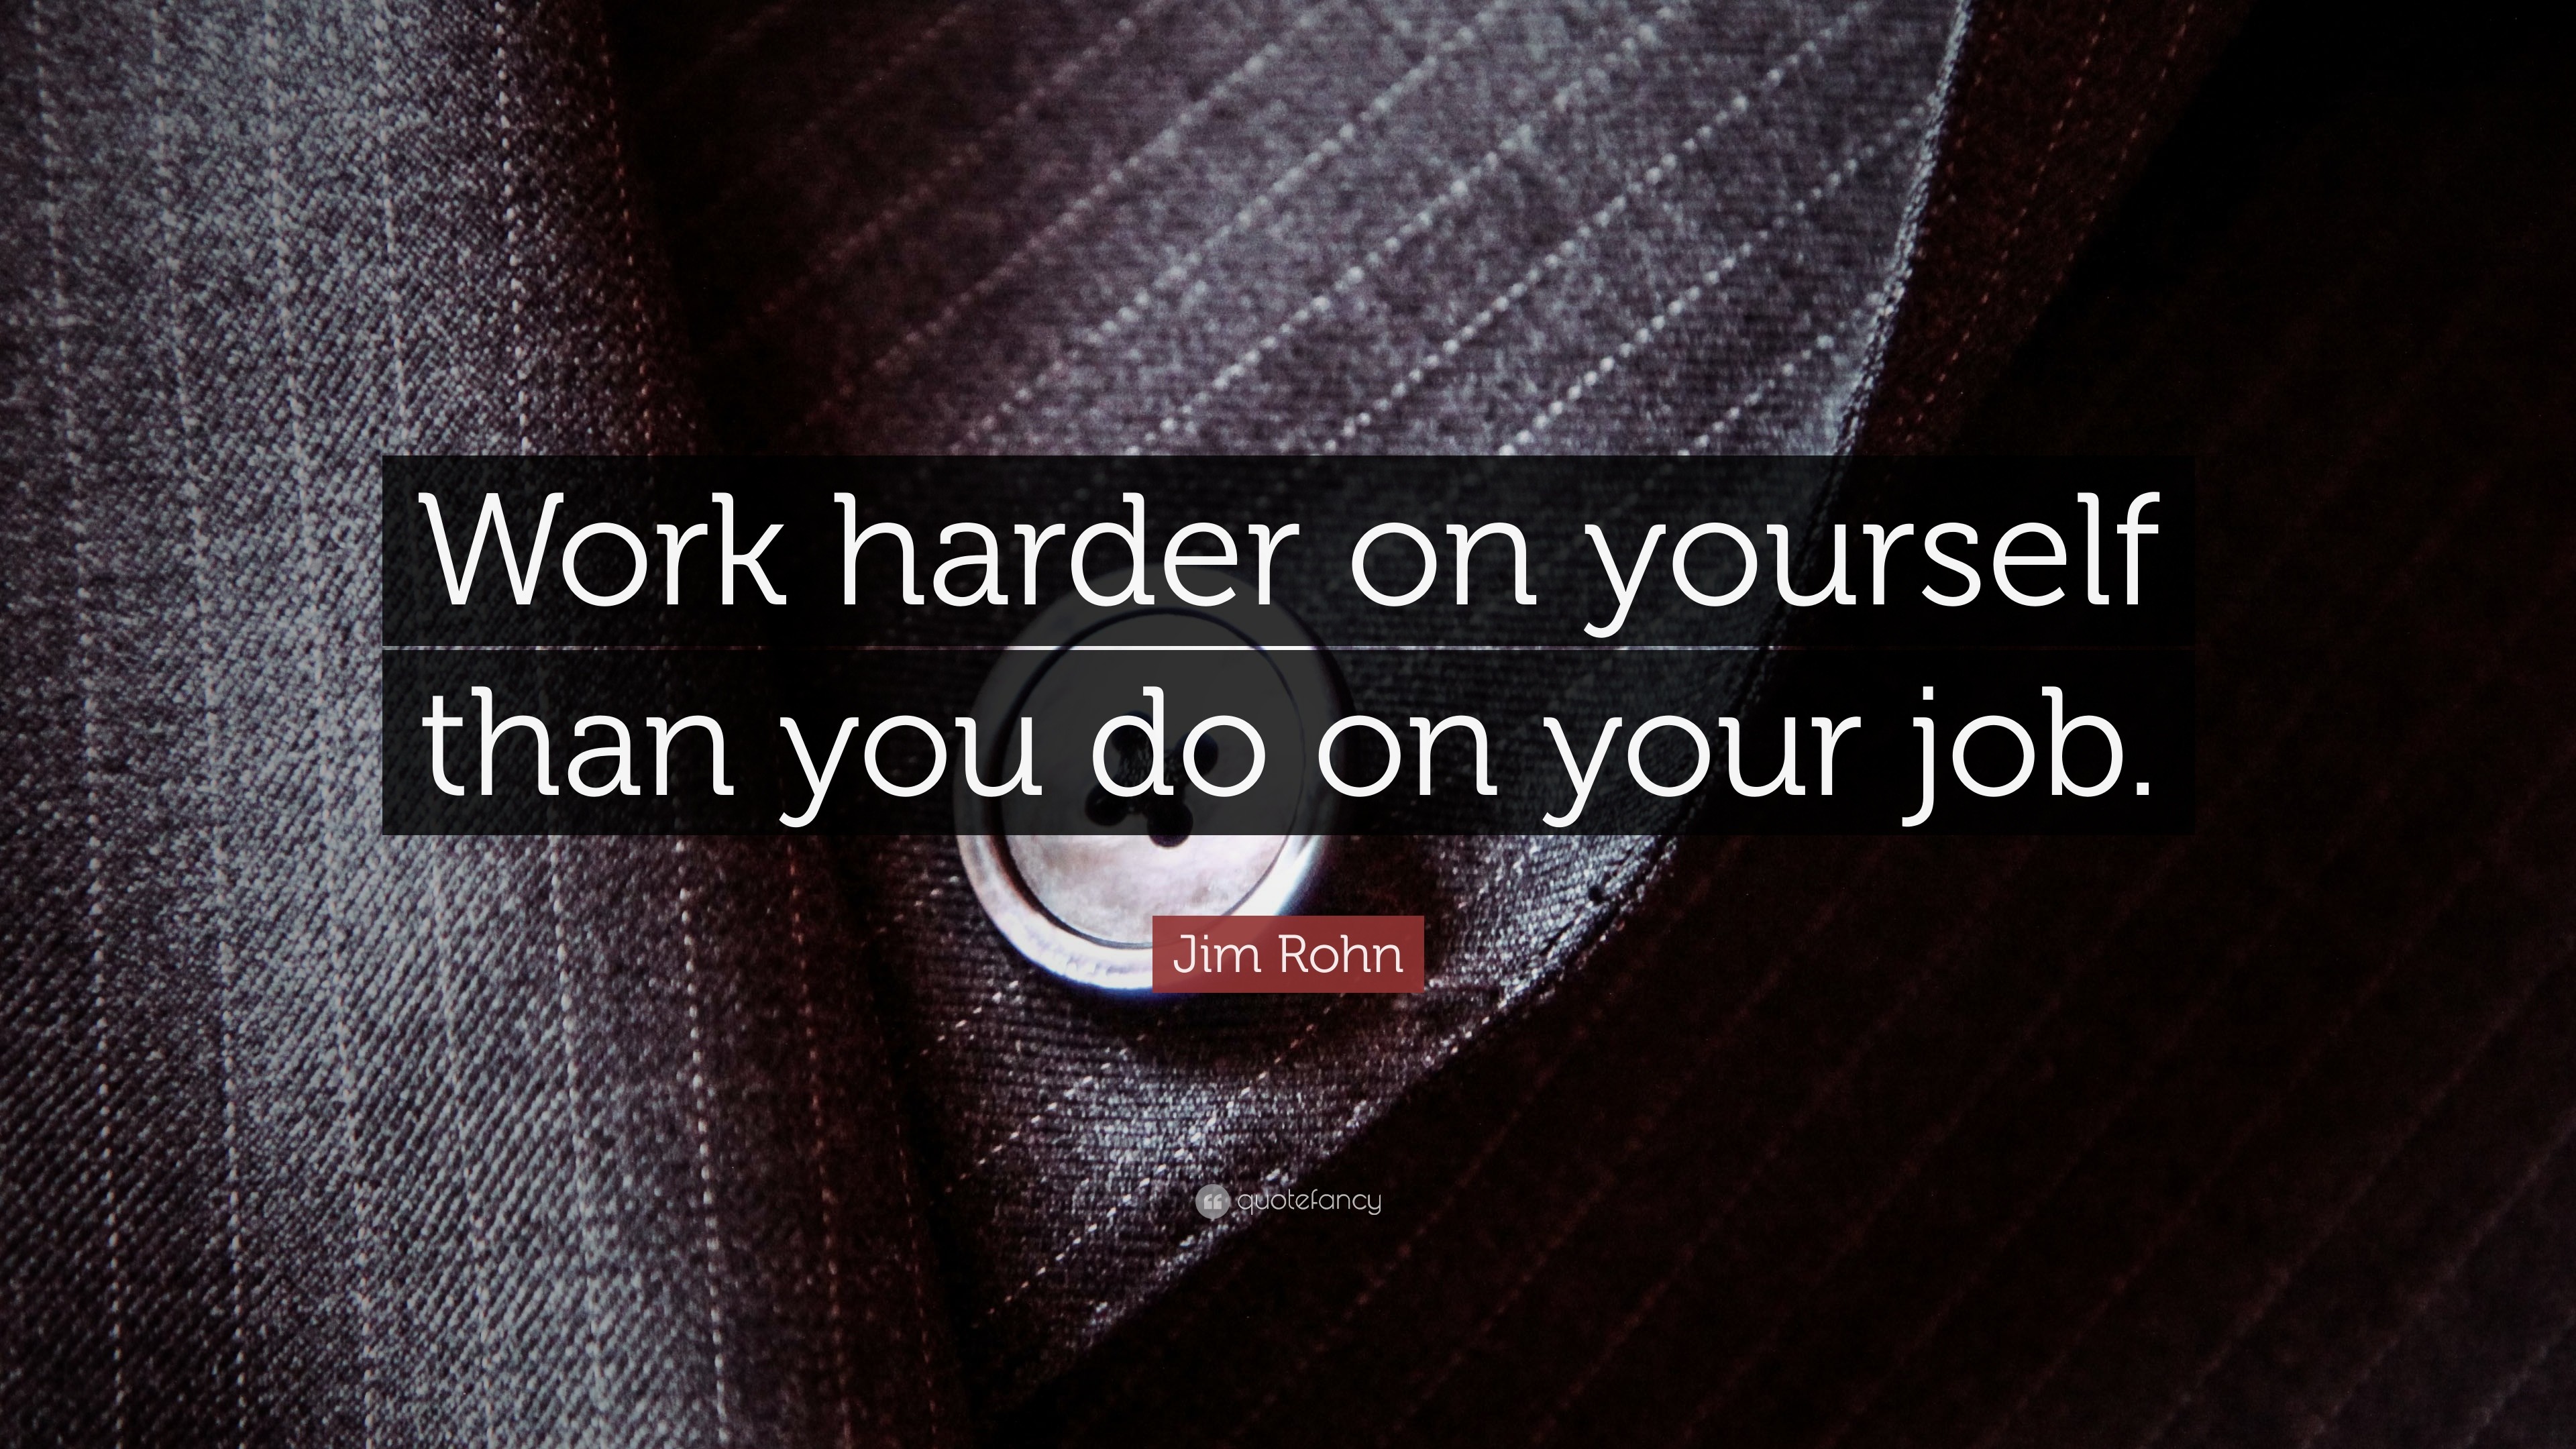 3840x2160 Spiritual Quotes: “Work harder on yourself than you do on your job.”